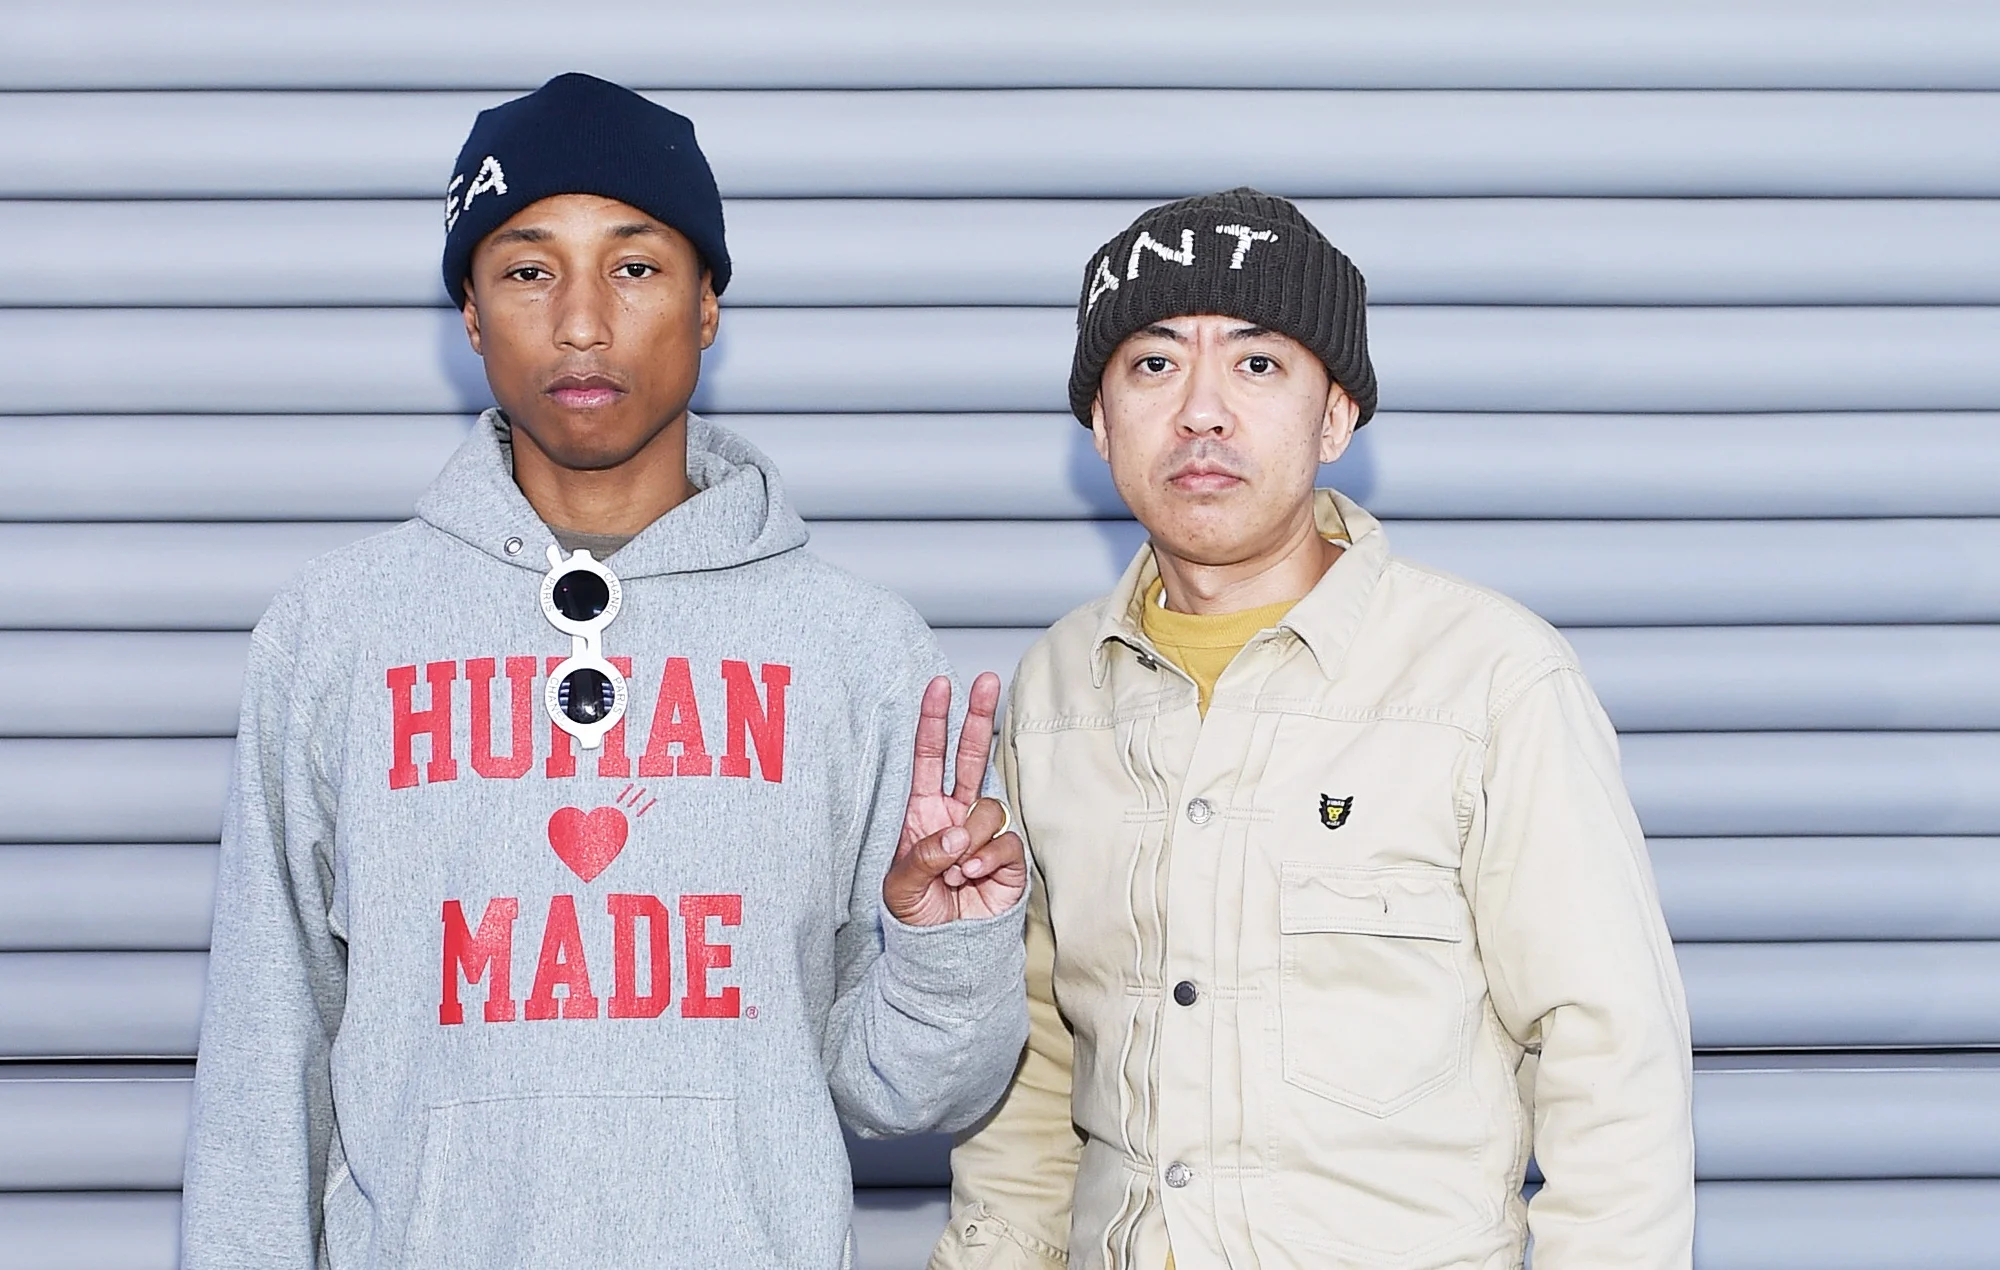 Pharell Williams and Nigo standing next to eachother